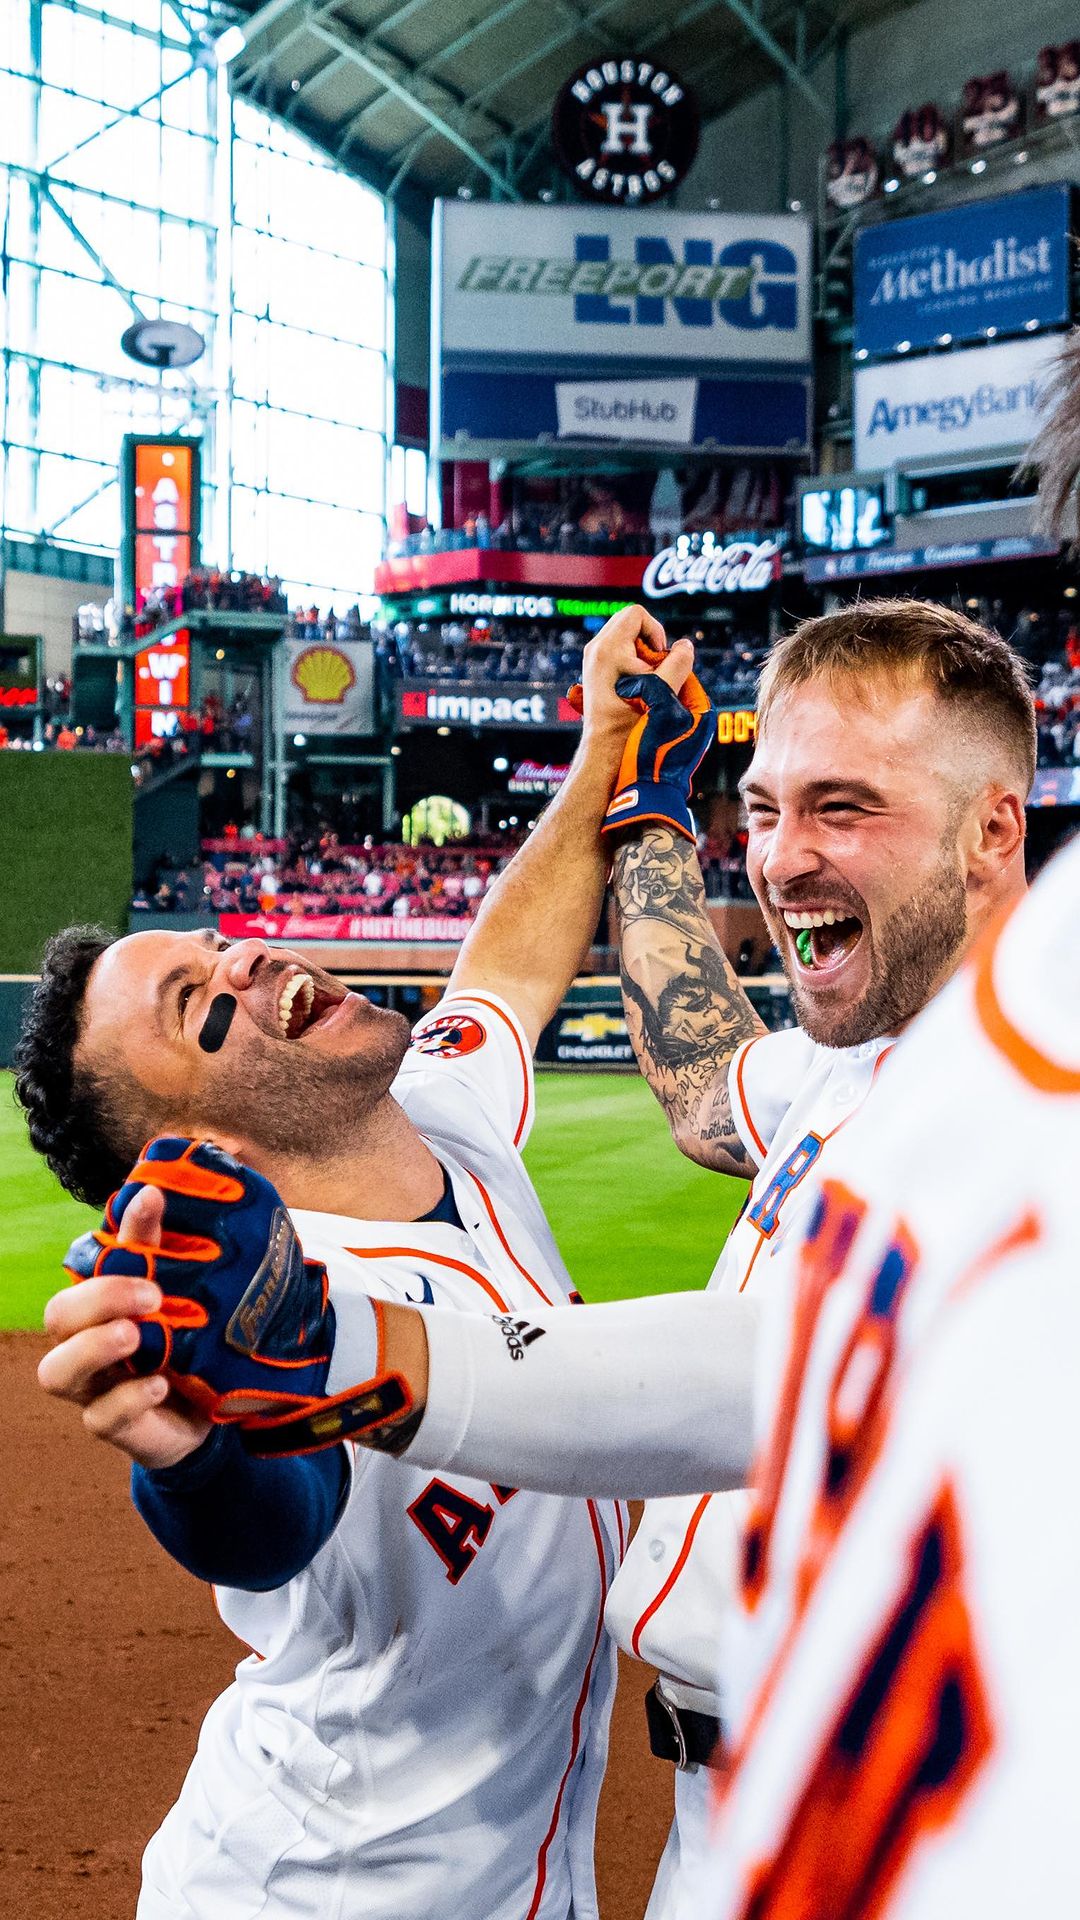 Winning homestand for the city!  #AstrosMoments...